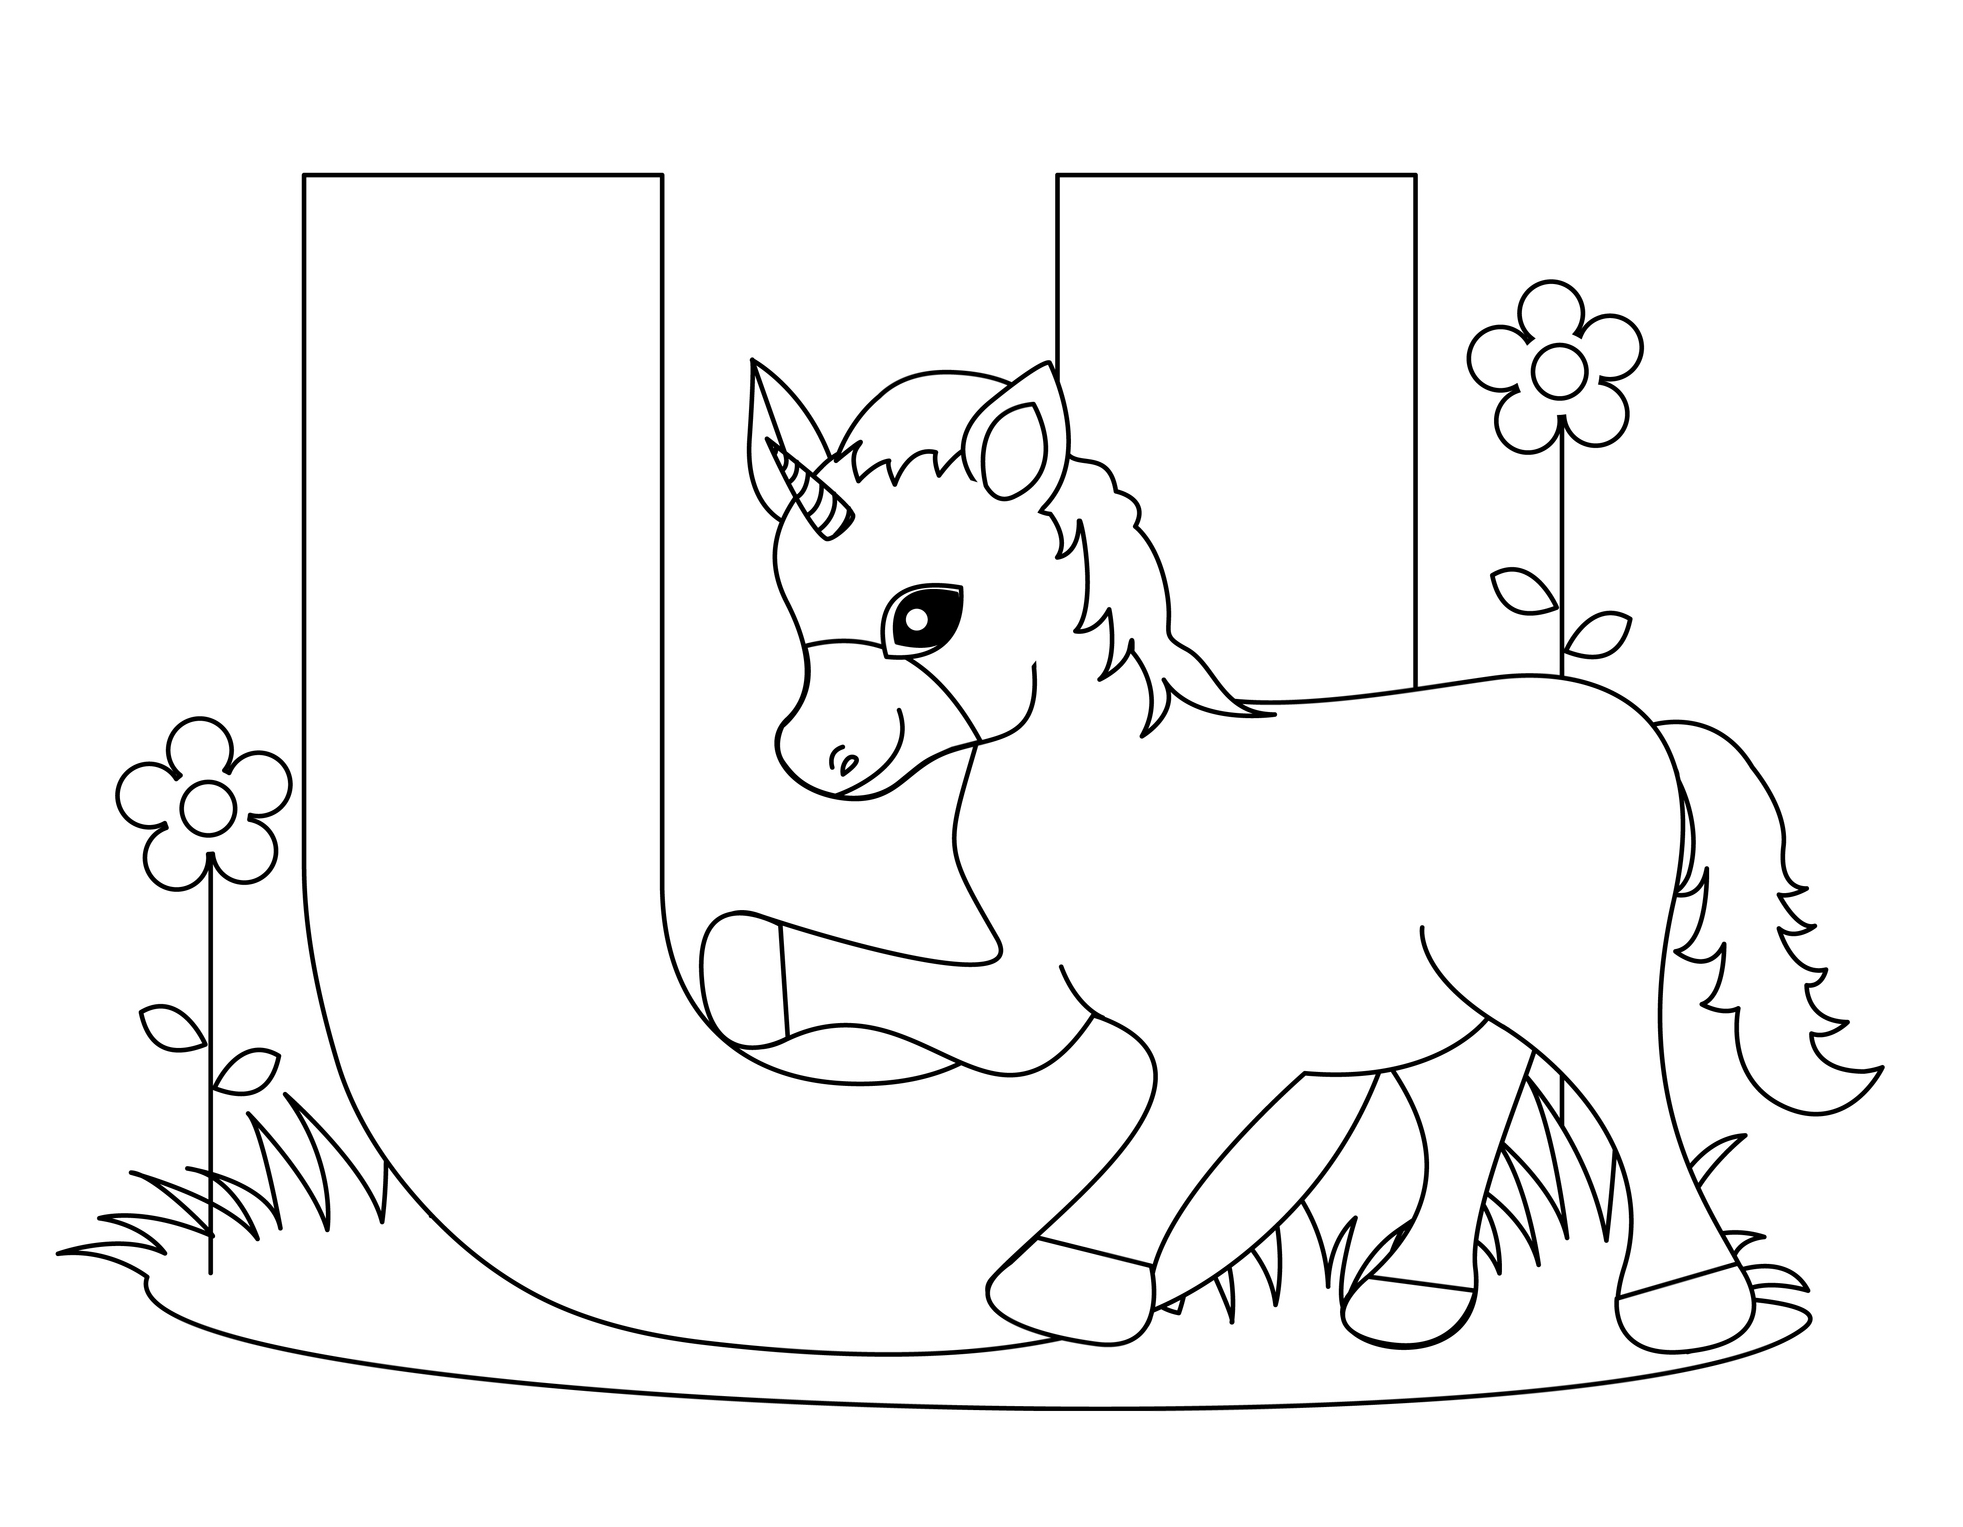 Animal Alphabet Coloring Pages at GetColorings.com   Free printable ...